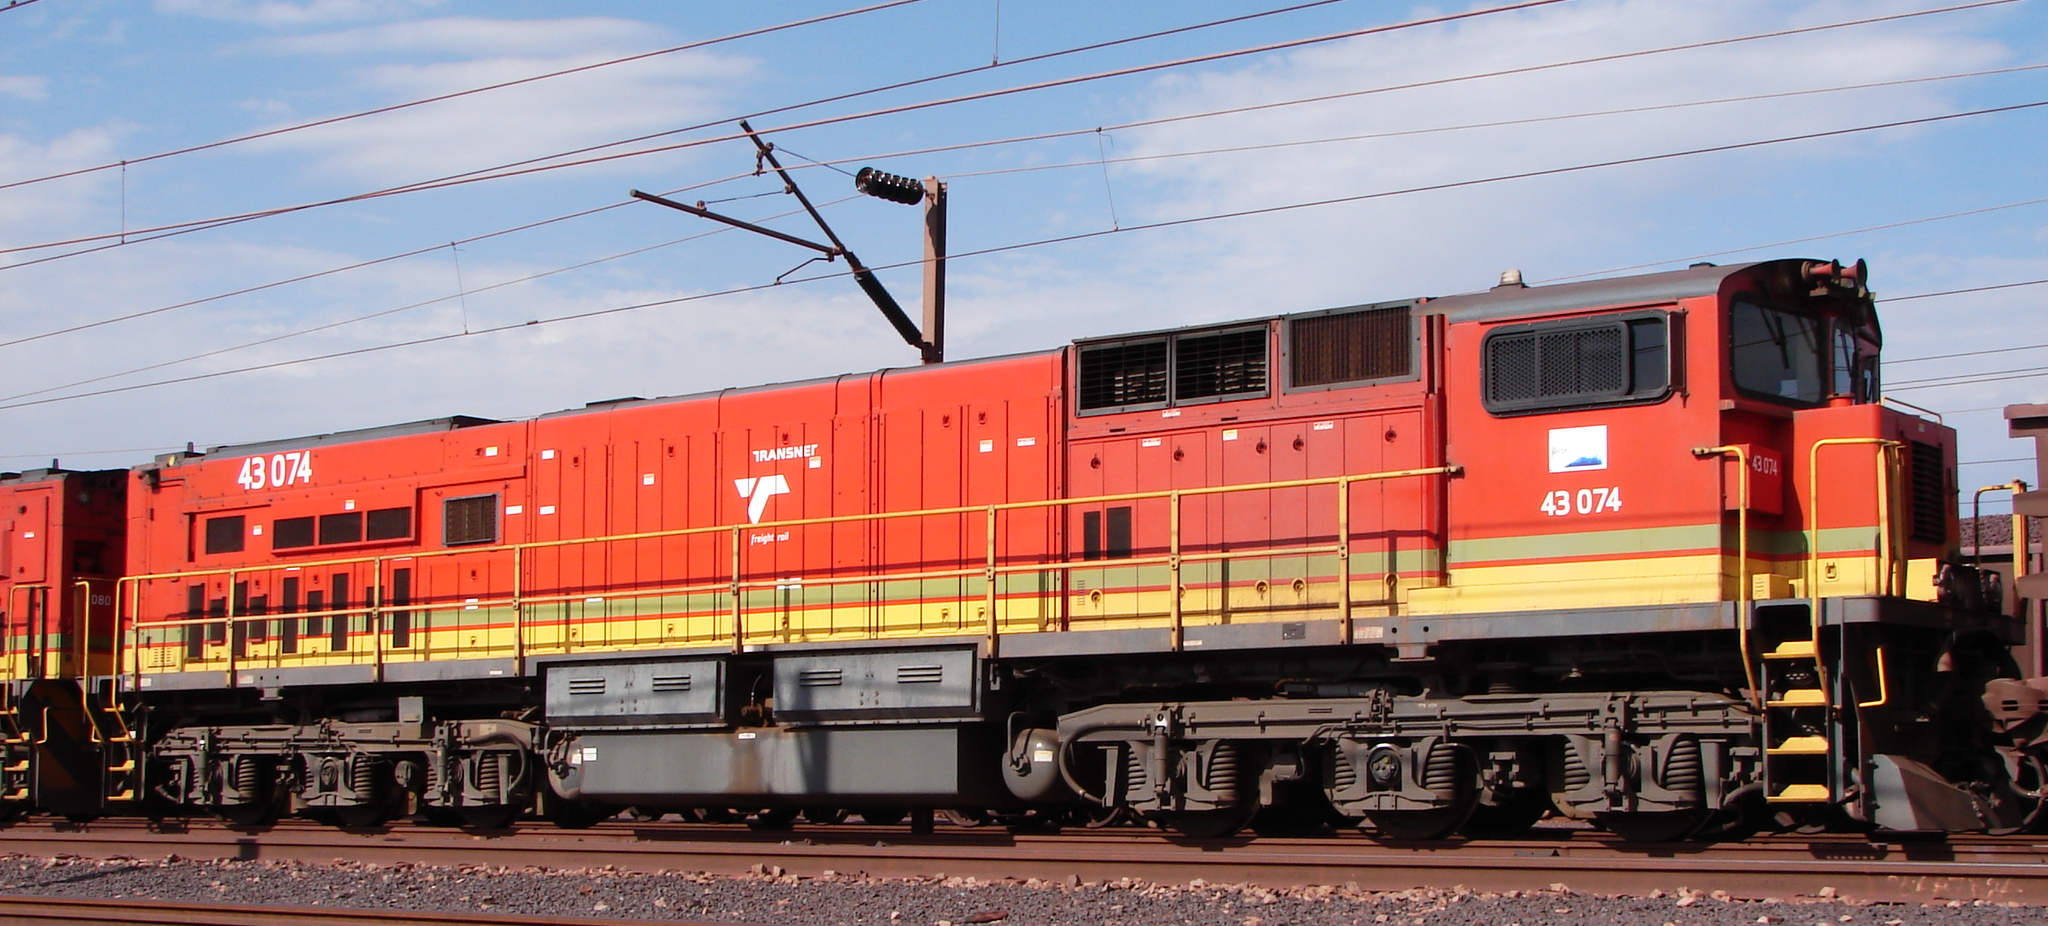 43-074 as part of a long ore train in October 2015 at Kathu, Northern Cape